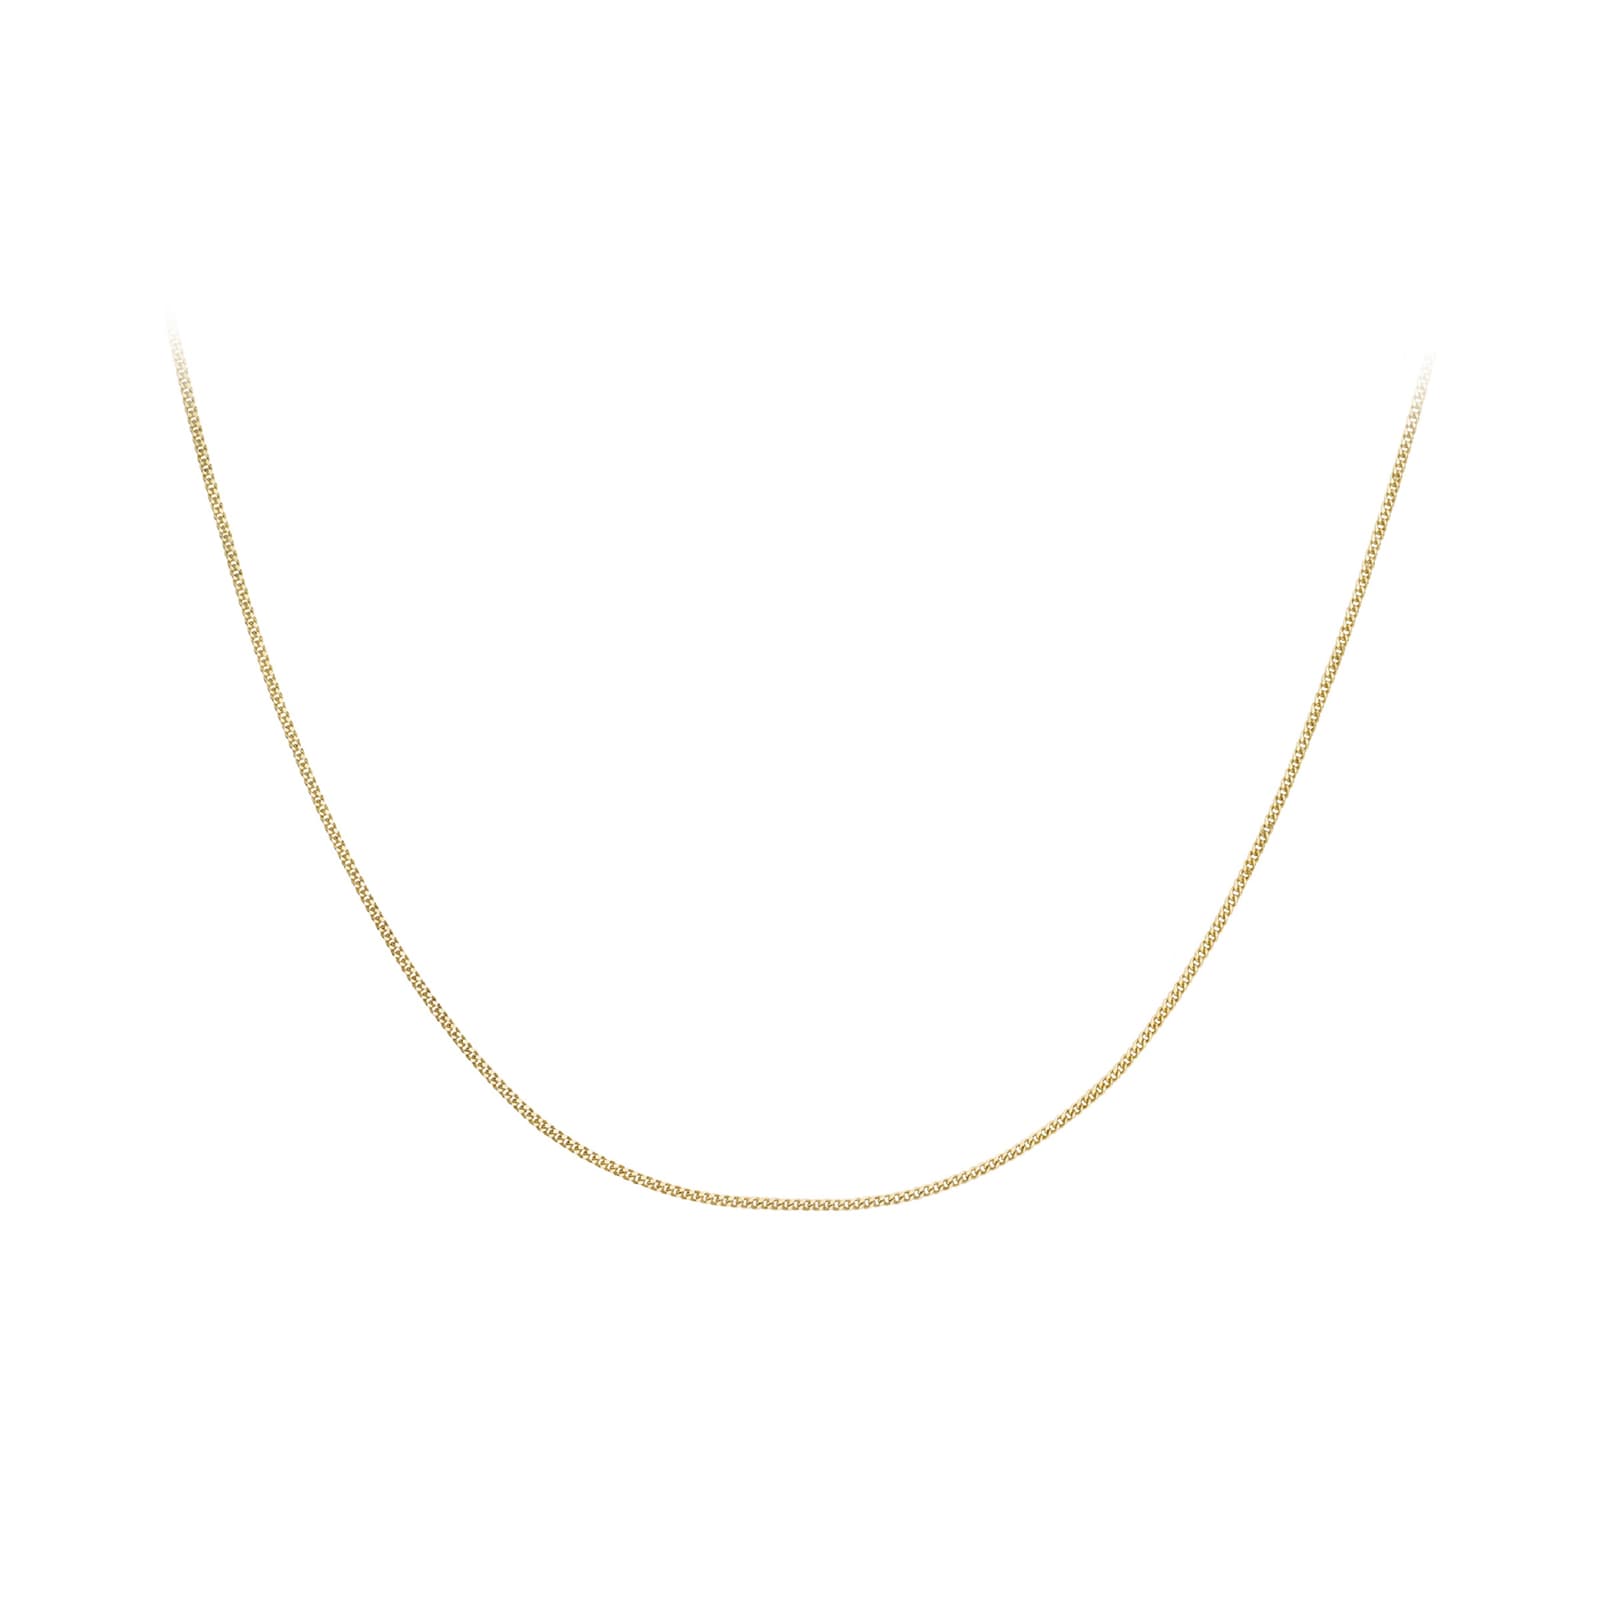 16 Inch Thick 9.50 MM 14K Gold Flat Curb Chain Styled Necklace